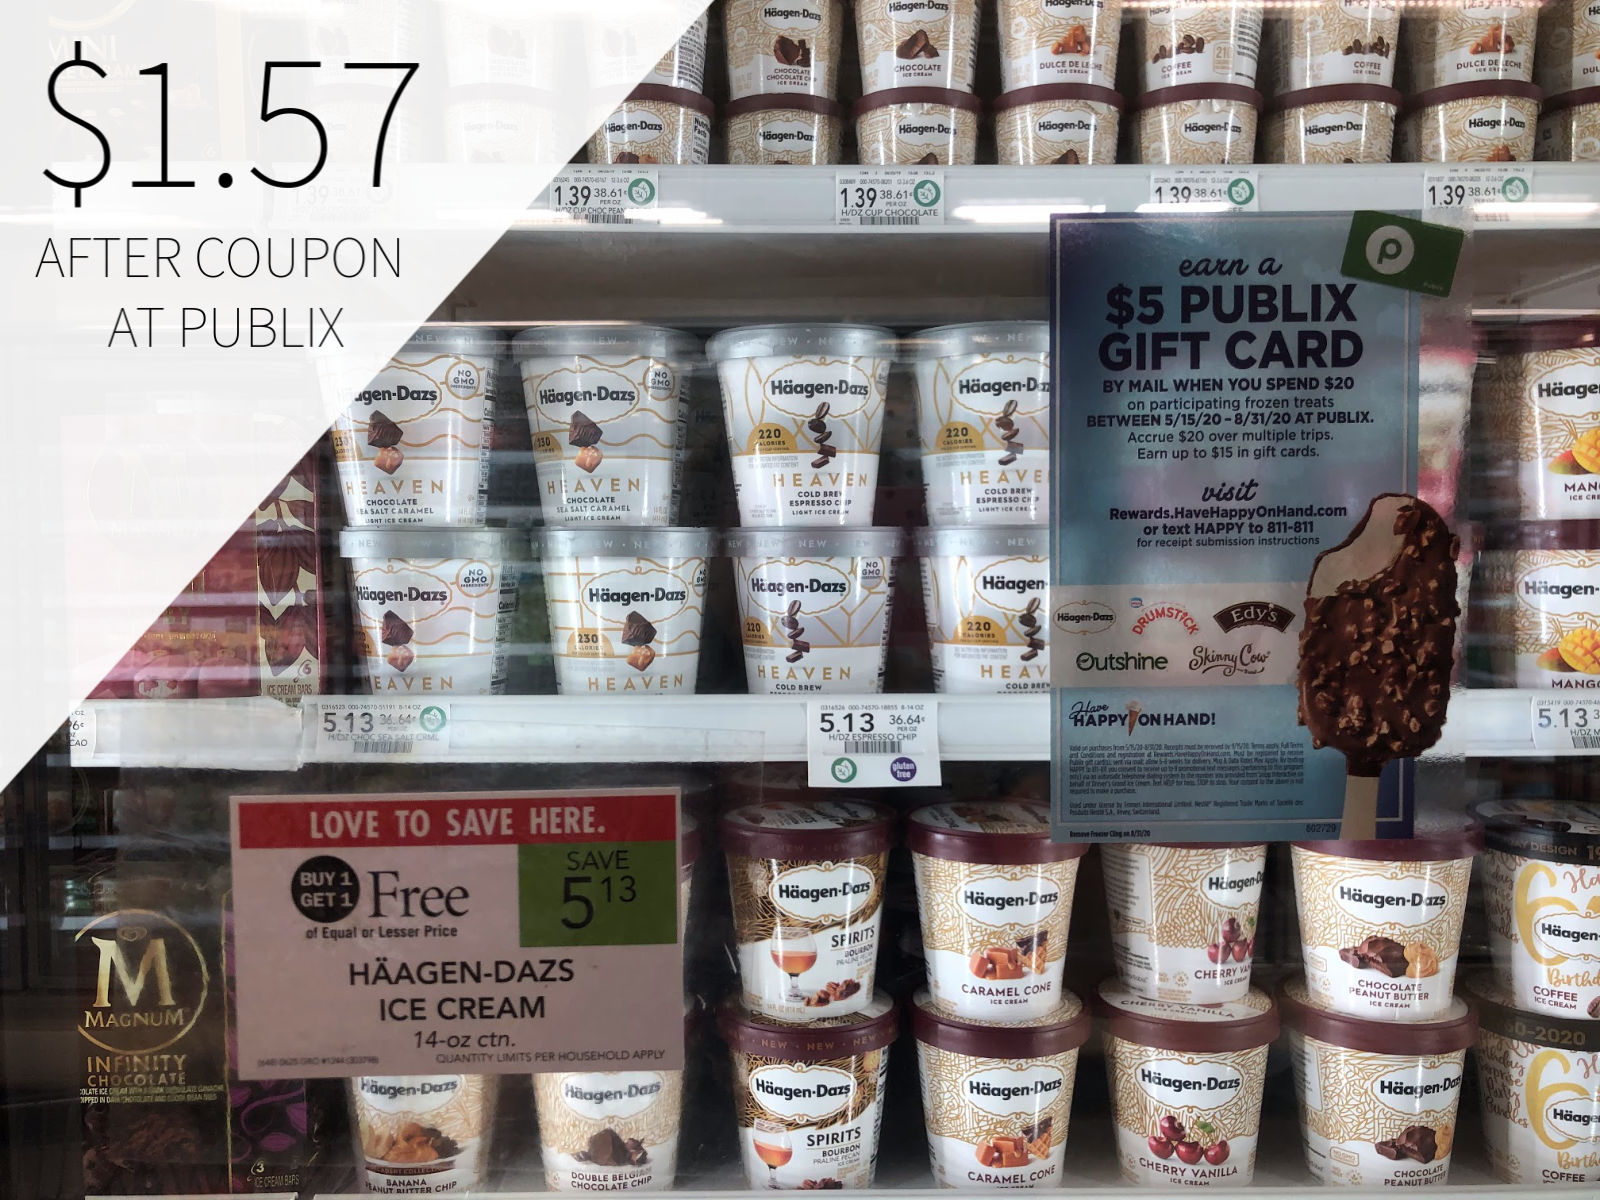 Fantastic Deal On Häagen-Dazs Ice Cream At Publix – Great Time To Try New Häagen-Dazs HEAVEN Light Ice Cream!